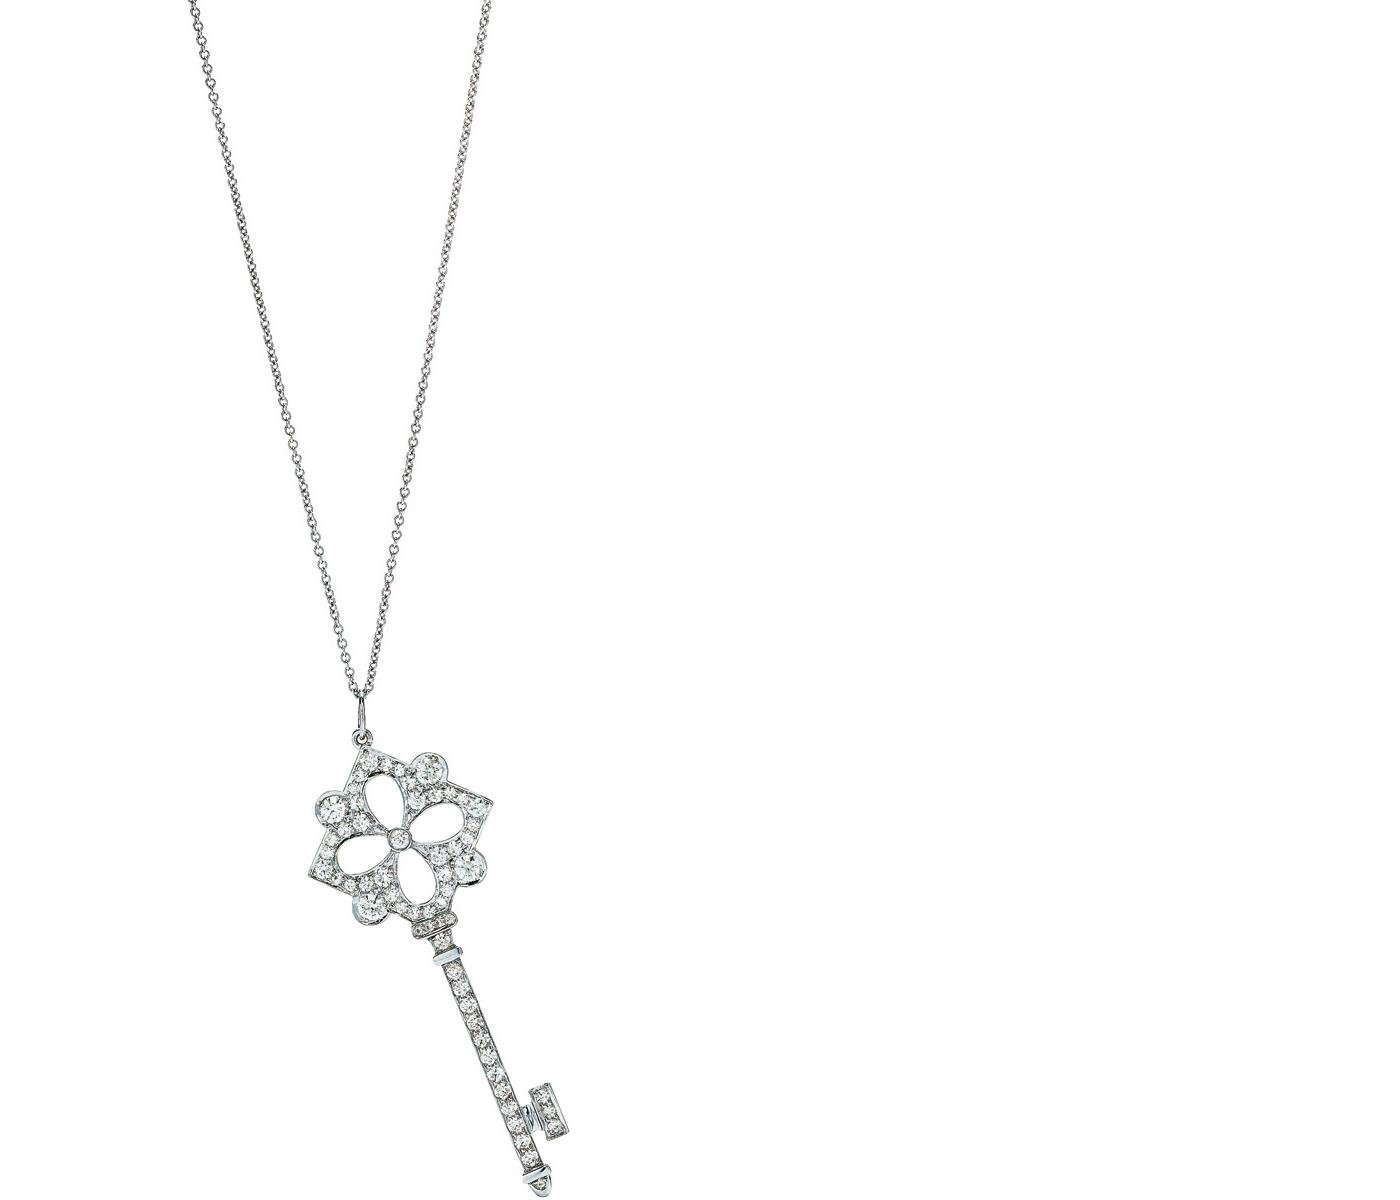 Necklace by Tiffany 